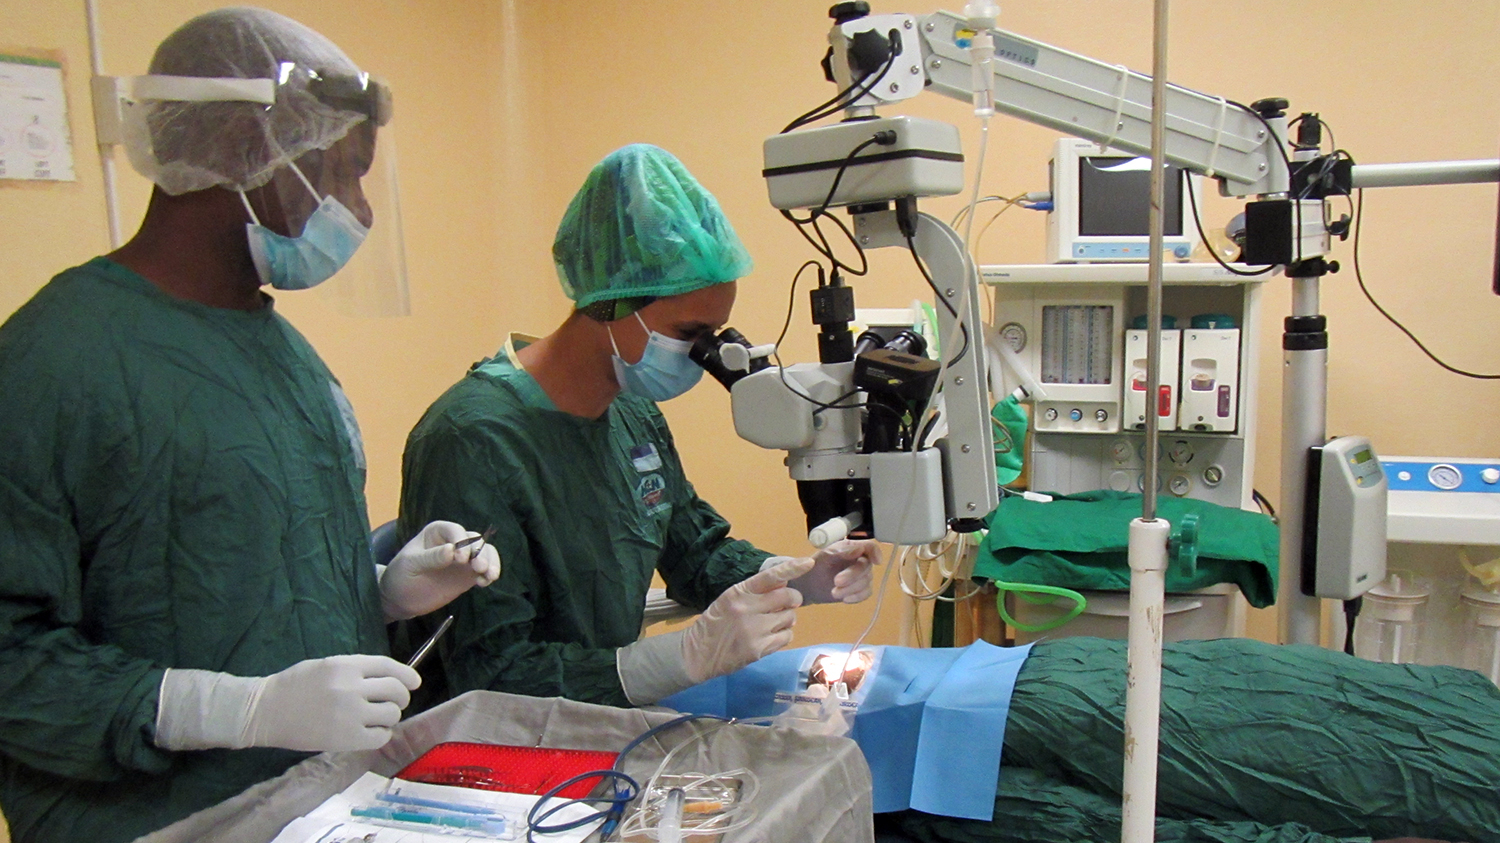 A surgeon, assisted by a nurse, performs cataract surgery on a patient.